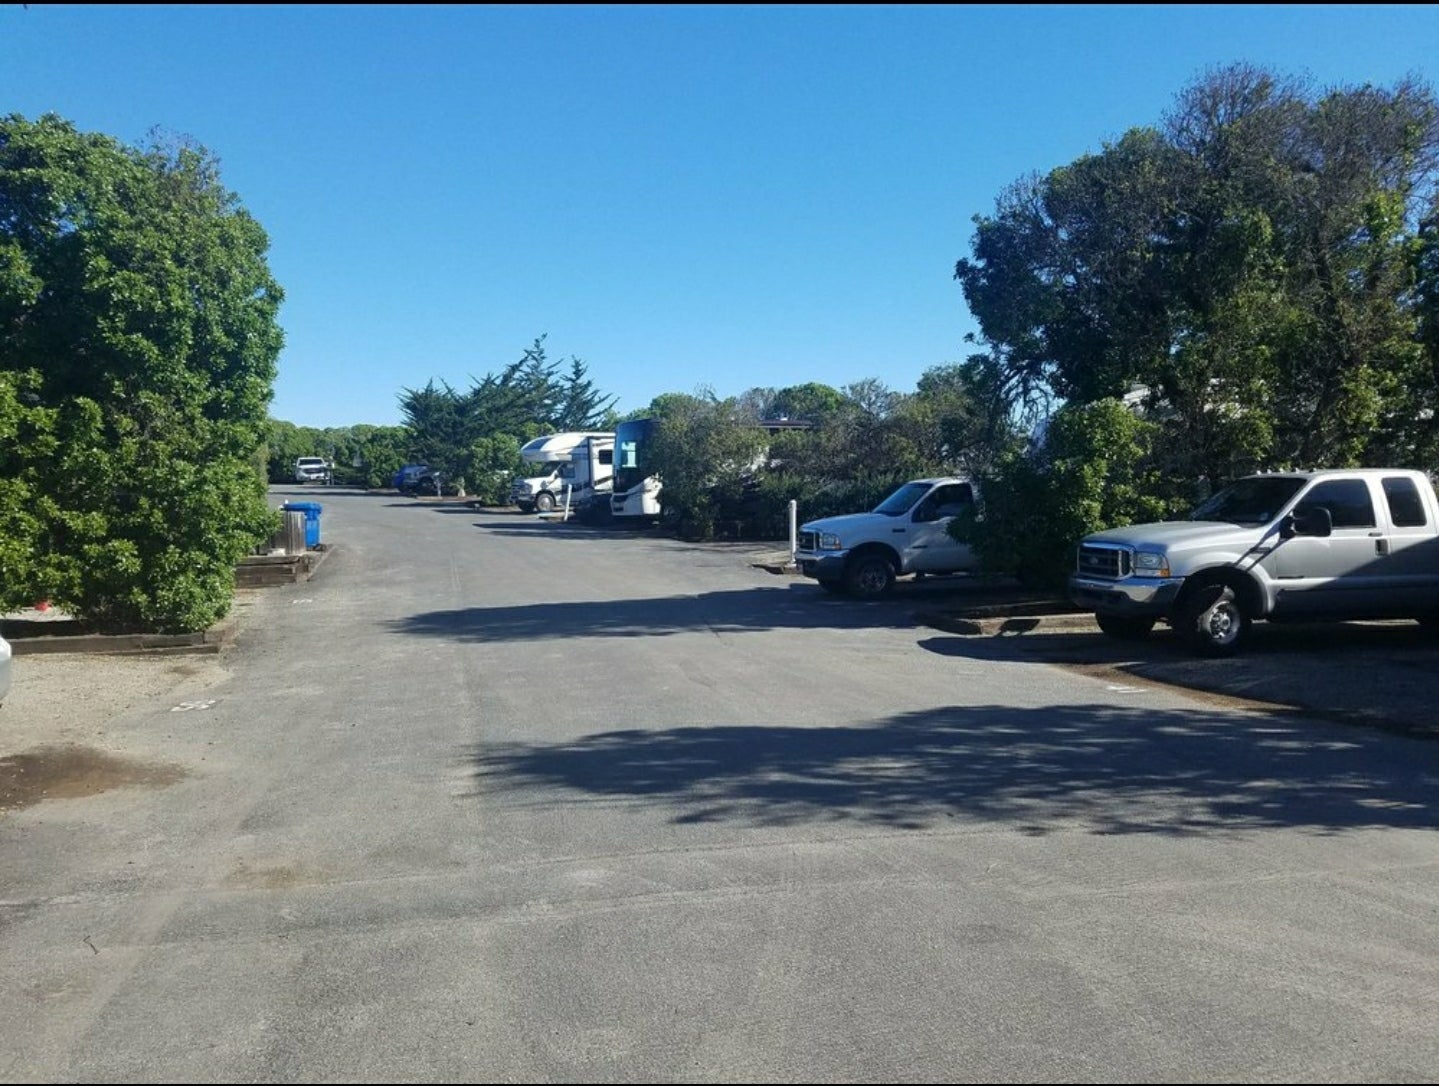 cars parked at rv park